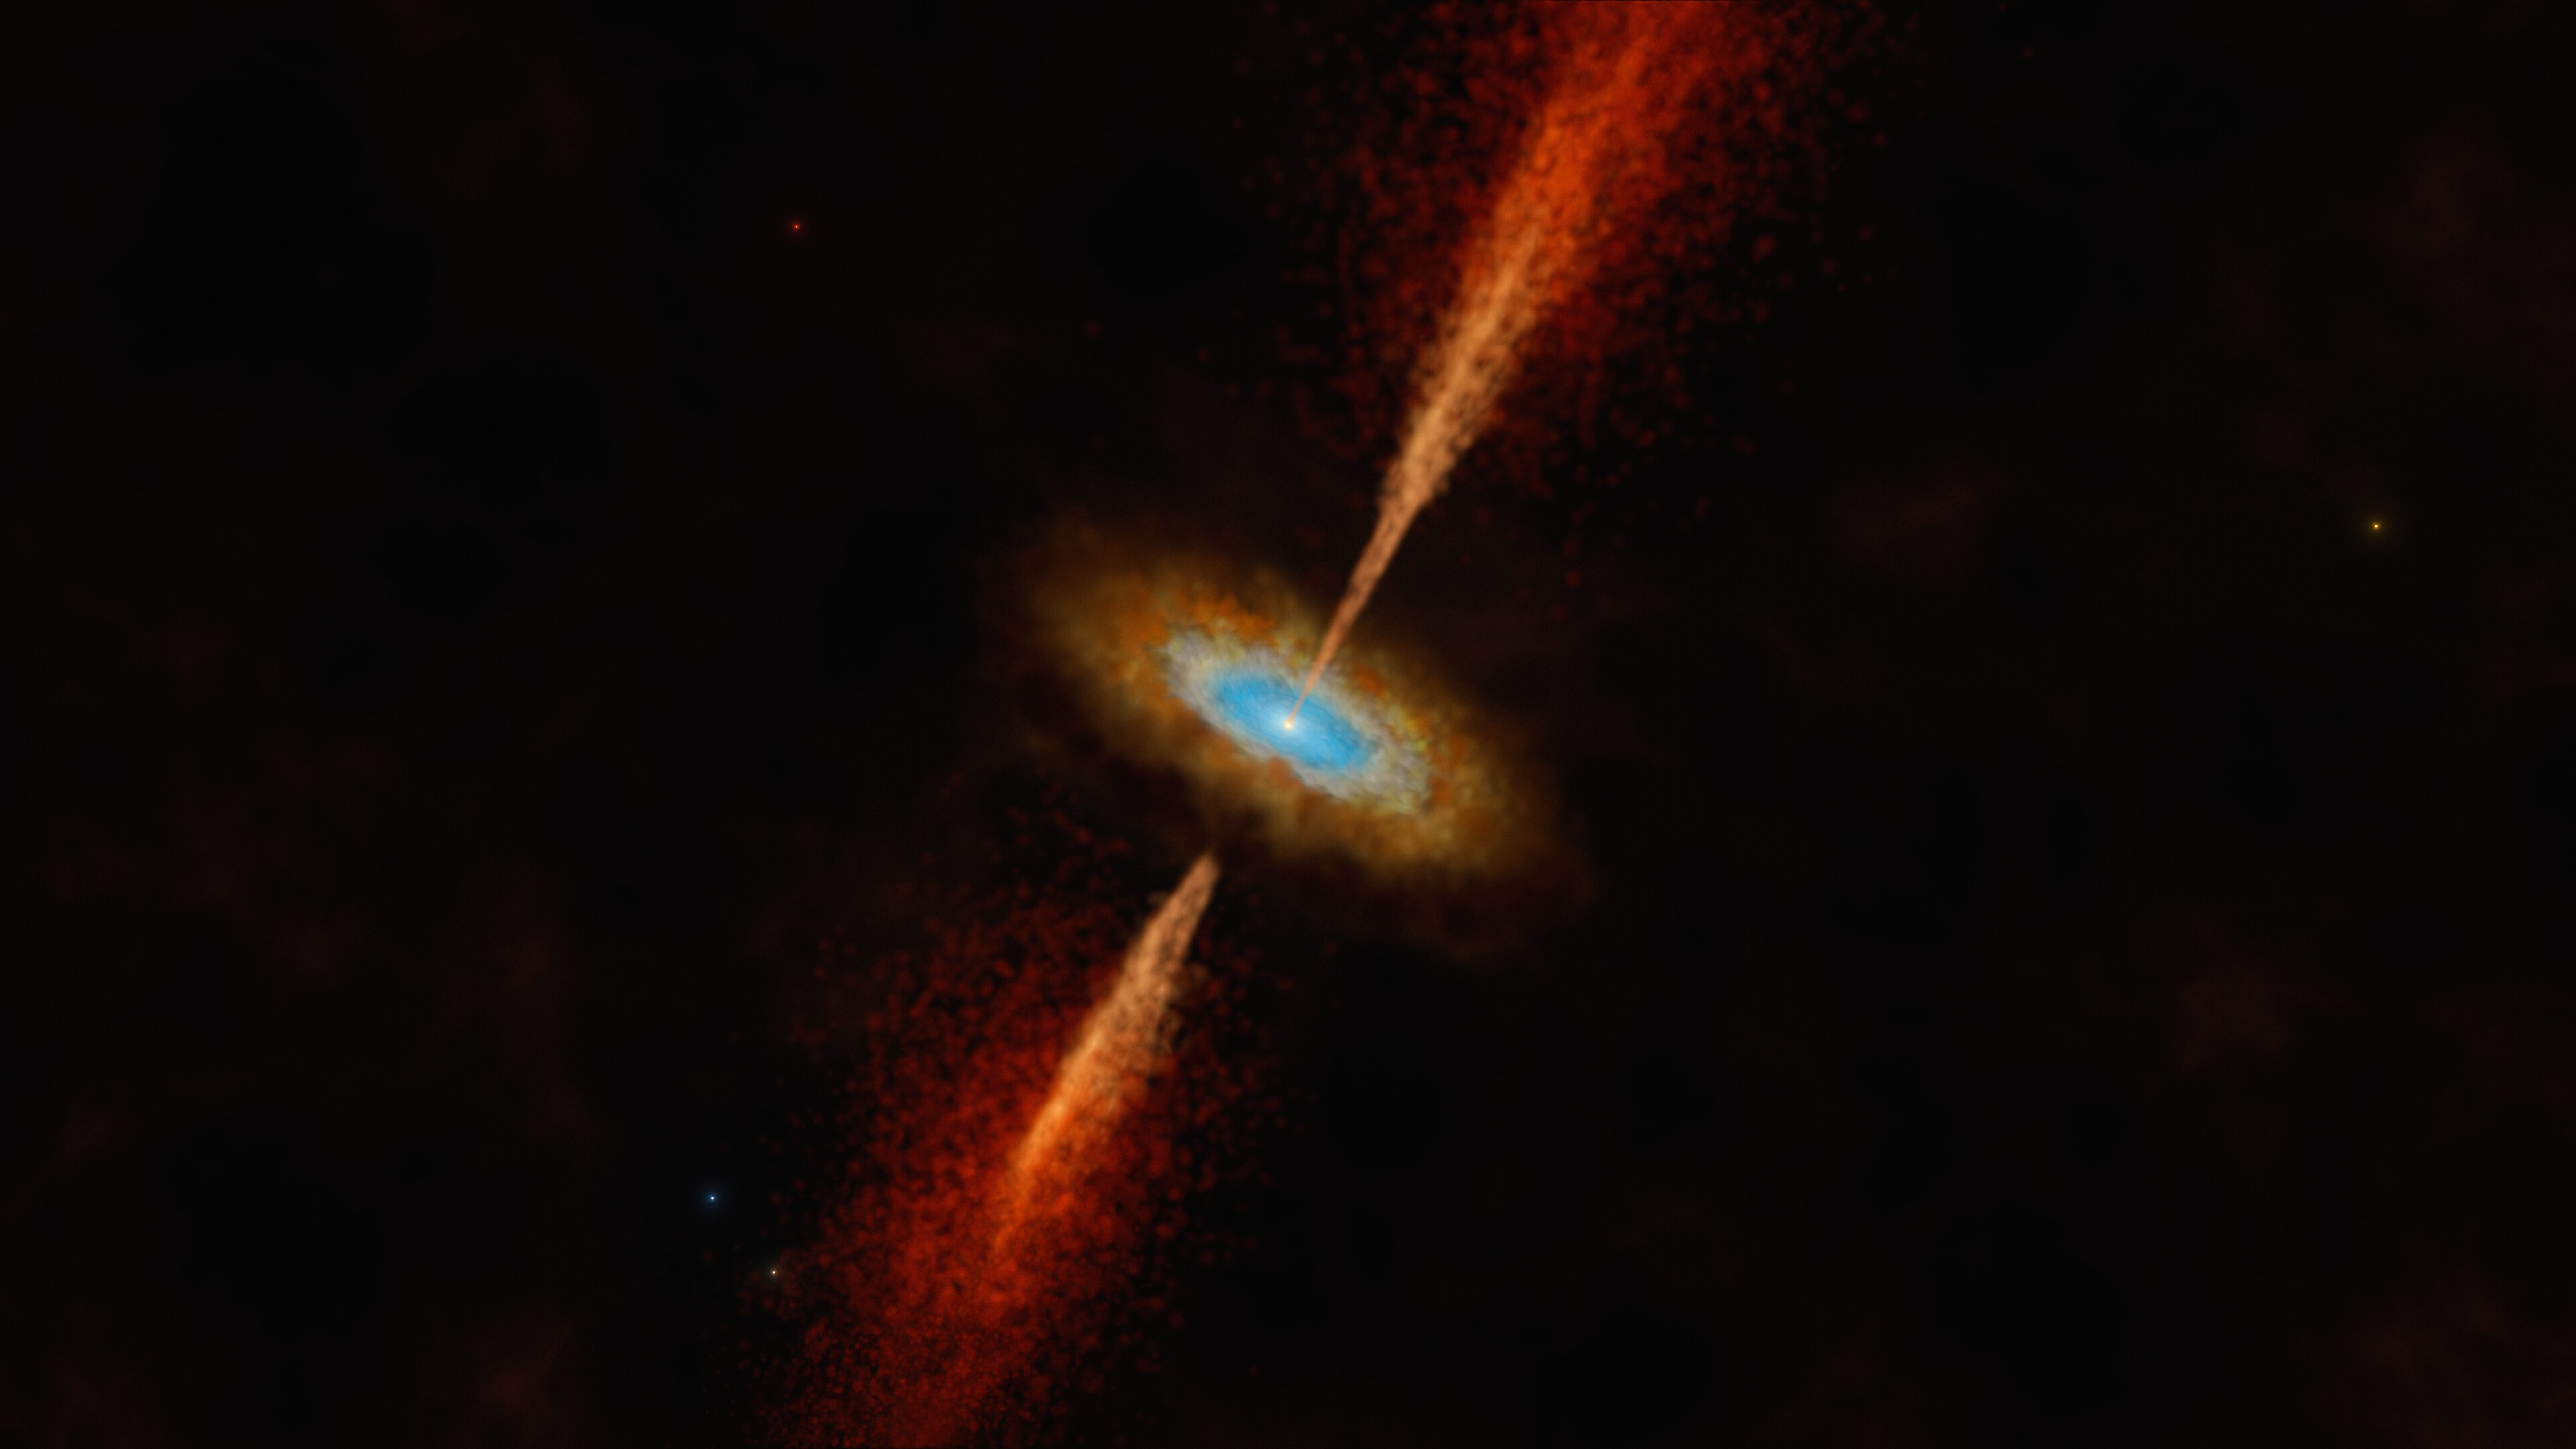 Artist’s impression of the disc and jet in the young star system HH 1177